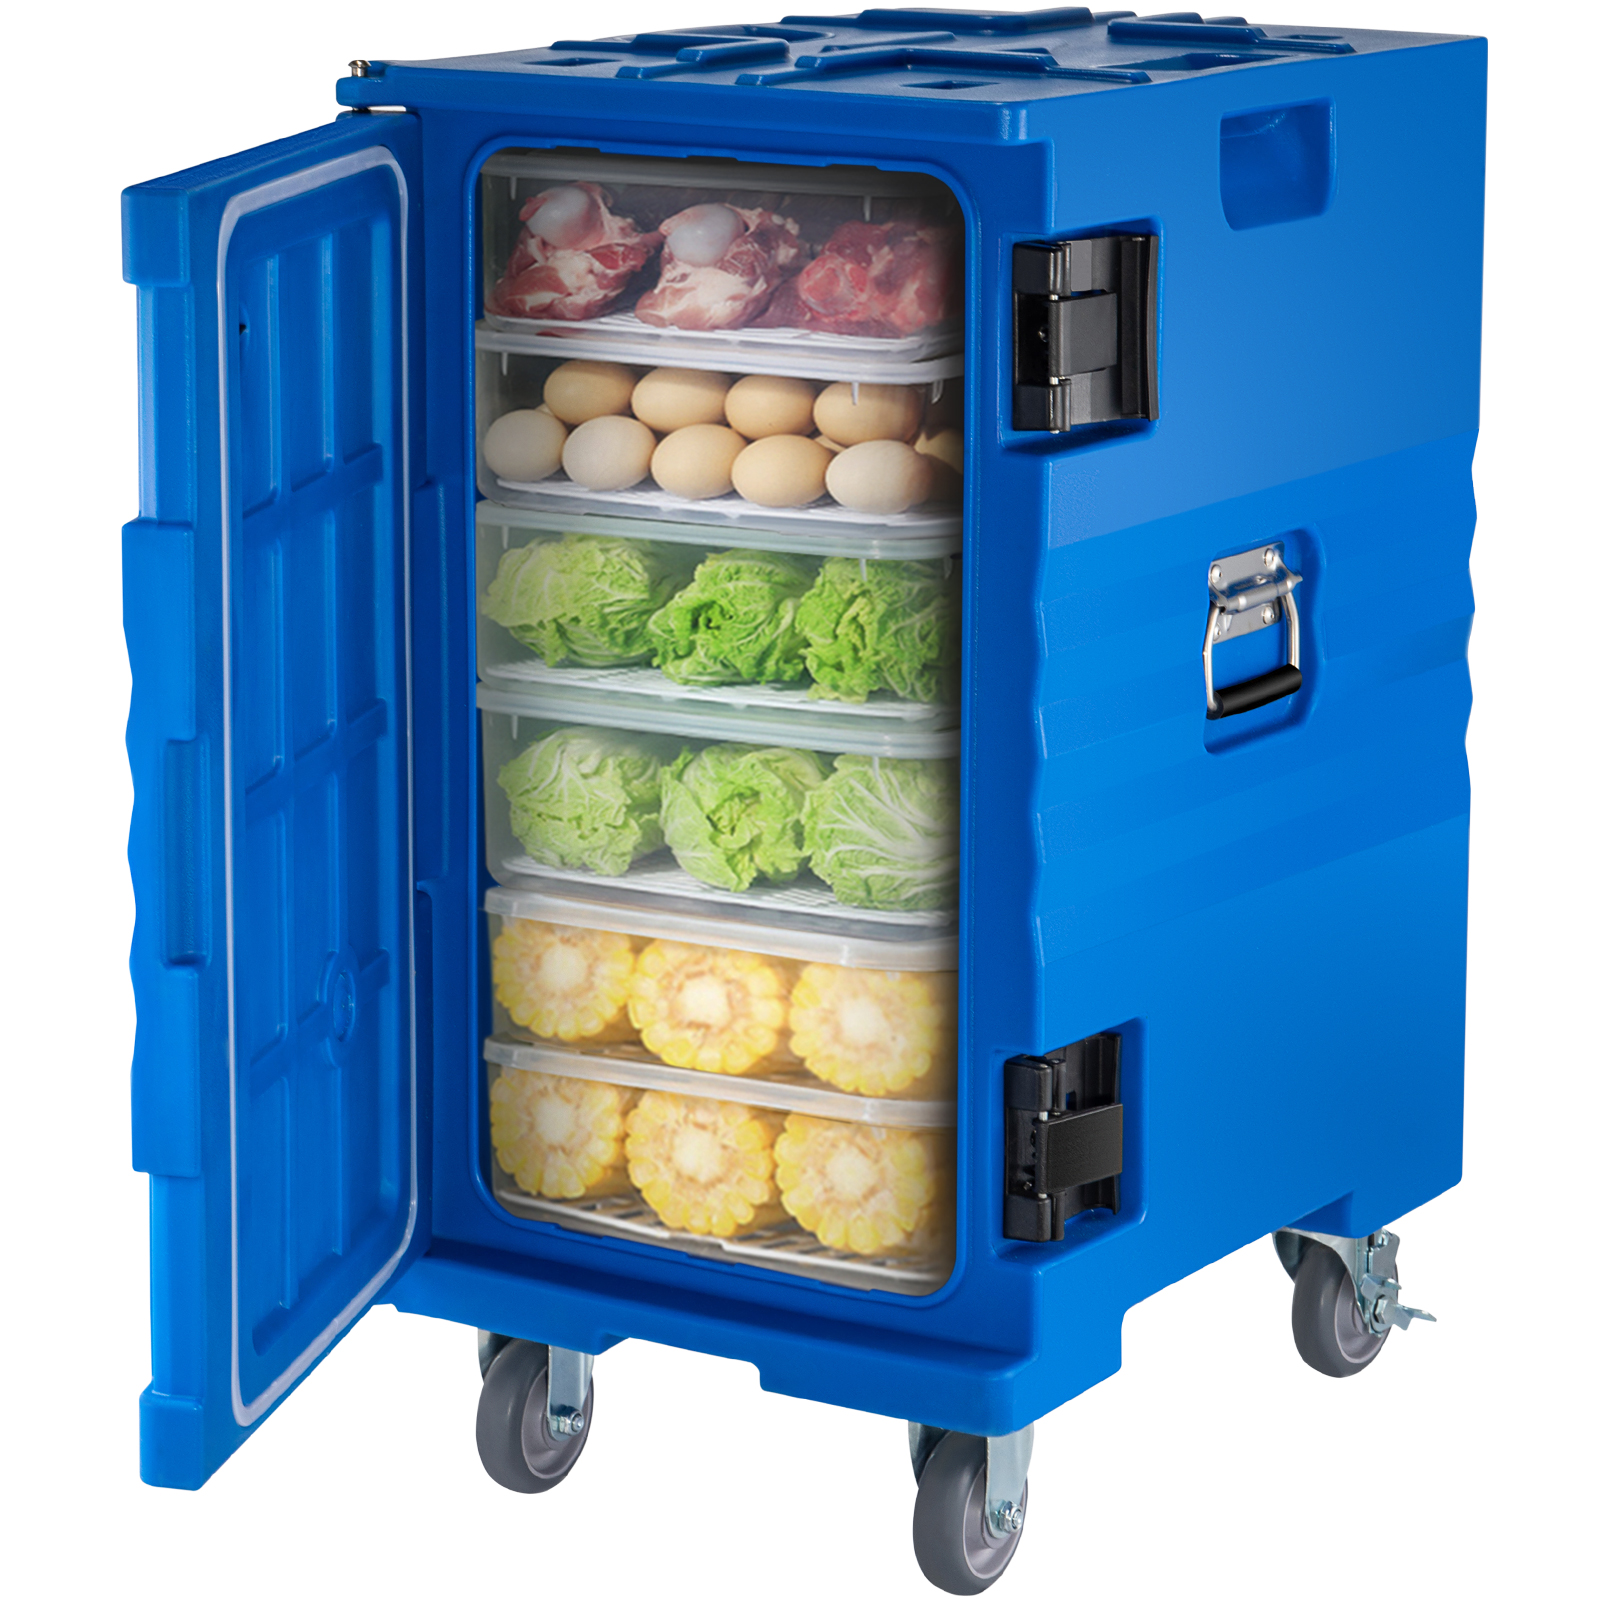 VEVOR Insulated Food Pan Carrier Front Load Catering Box w/ Wheels 109 Qt Blue от Vevor Many GEOs